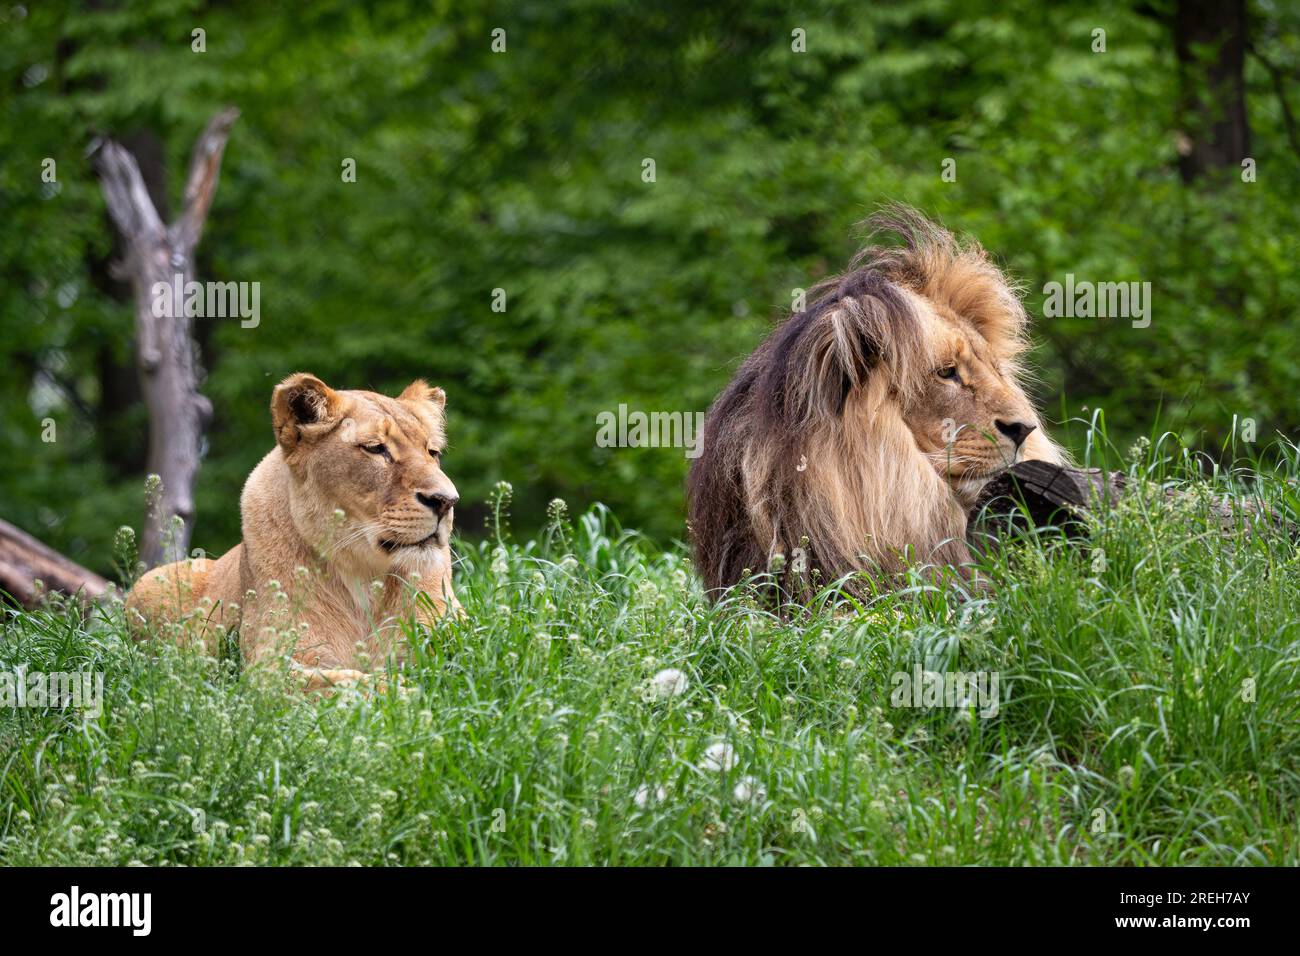 Katanga Lion or Southwest African Lion, panthera leo bleyenberghi. African lion in the grass. Stock Photo